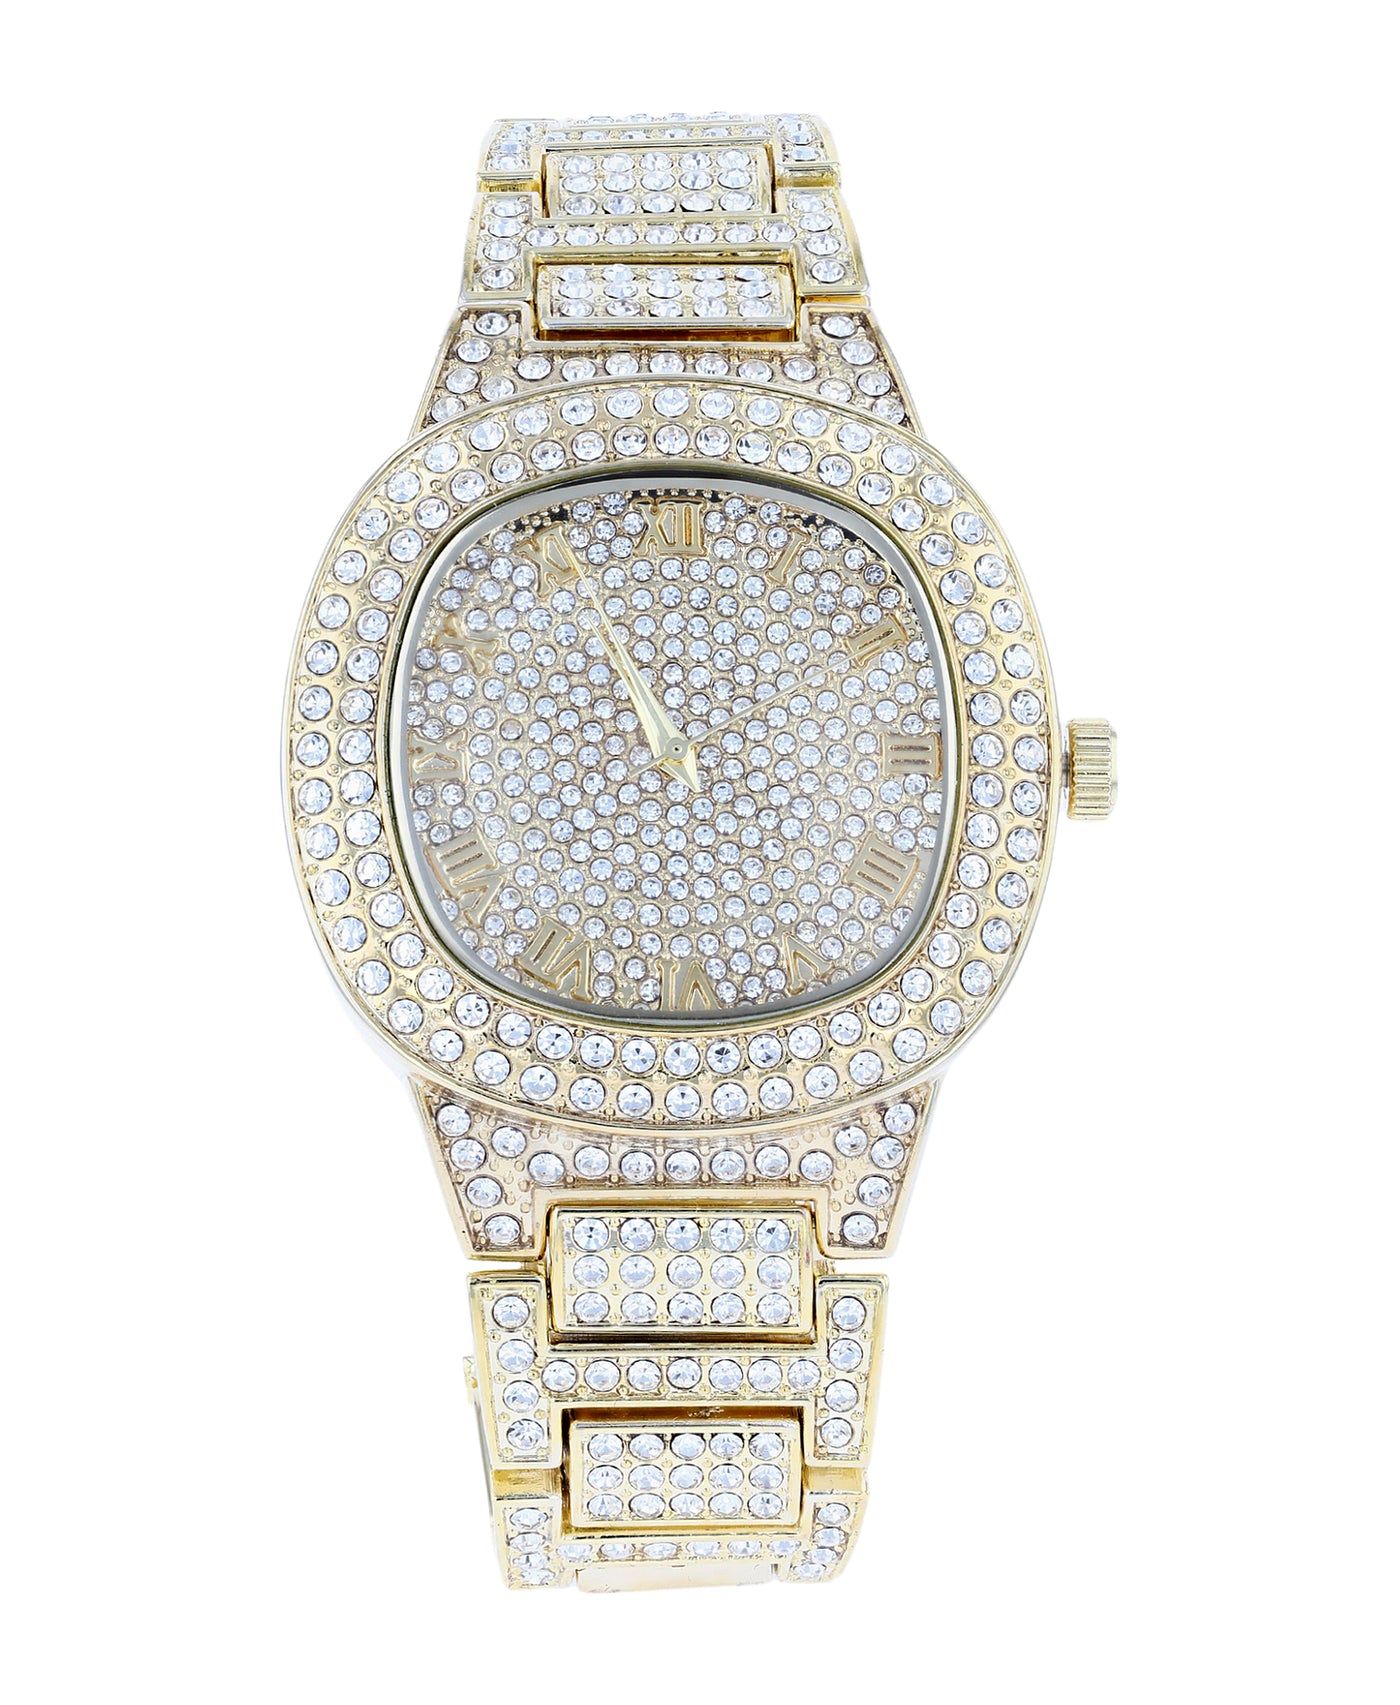 Oversized Square Watch w/ Crystals image 1